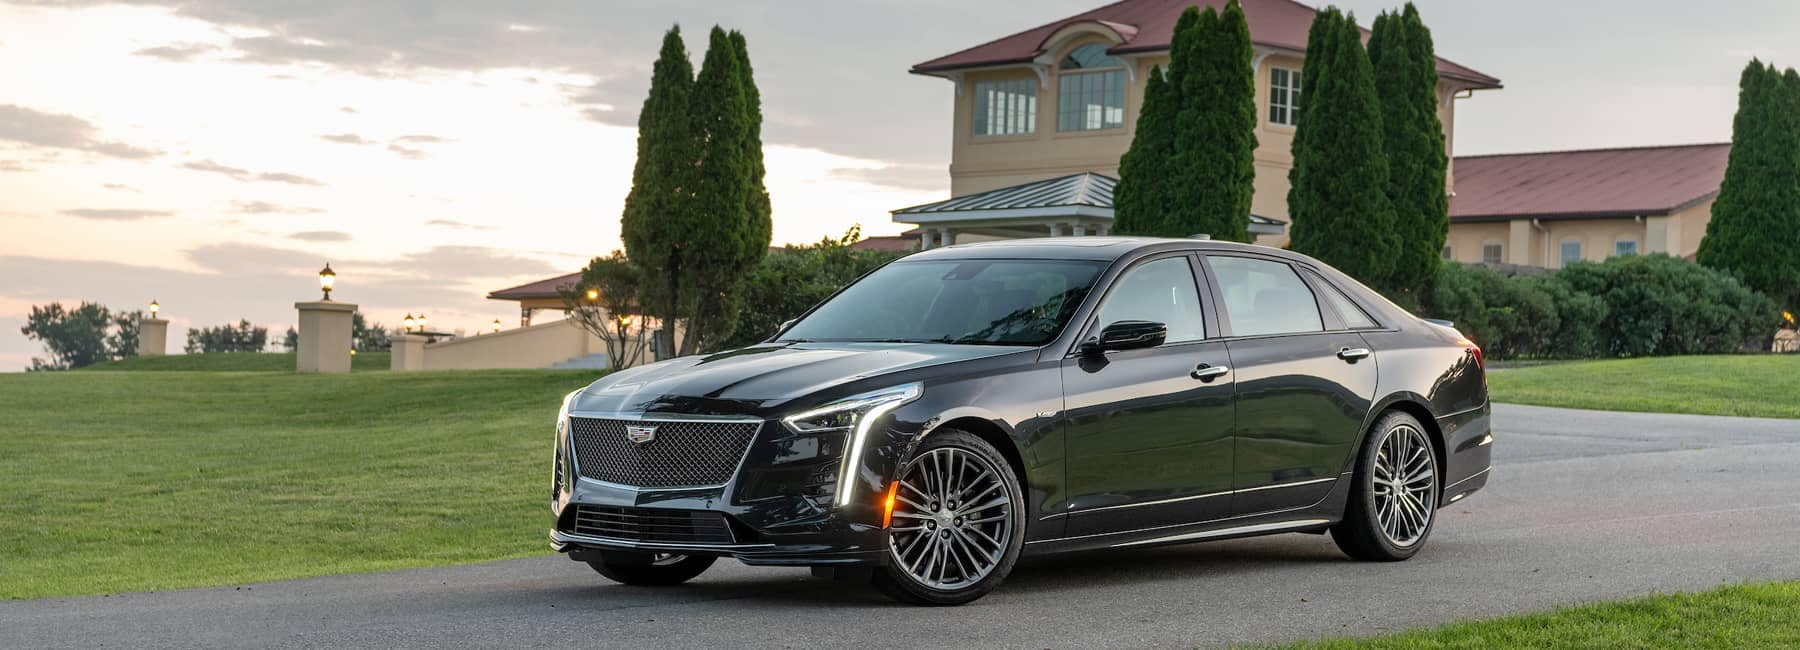 A Black 2019 Cadillac Sedan parked in front of a large building with nice grass